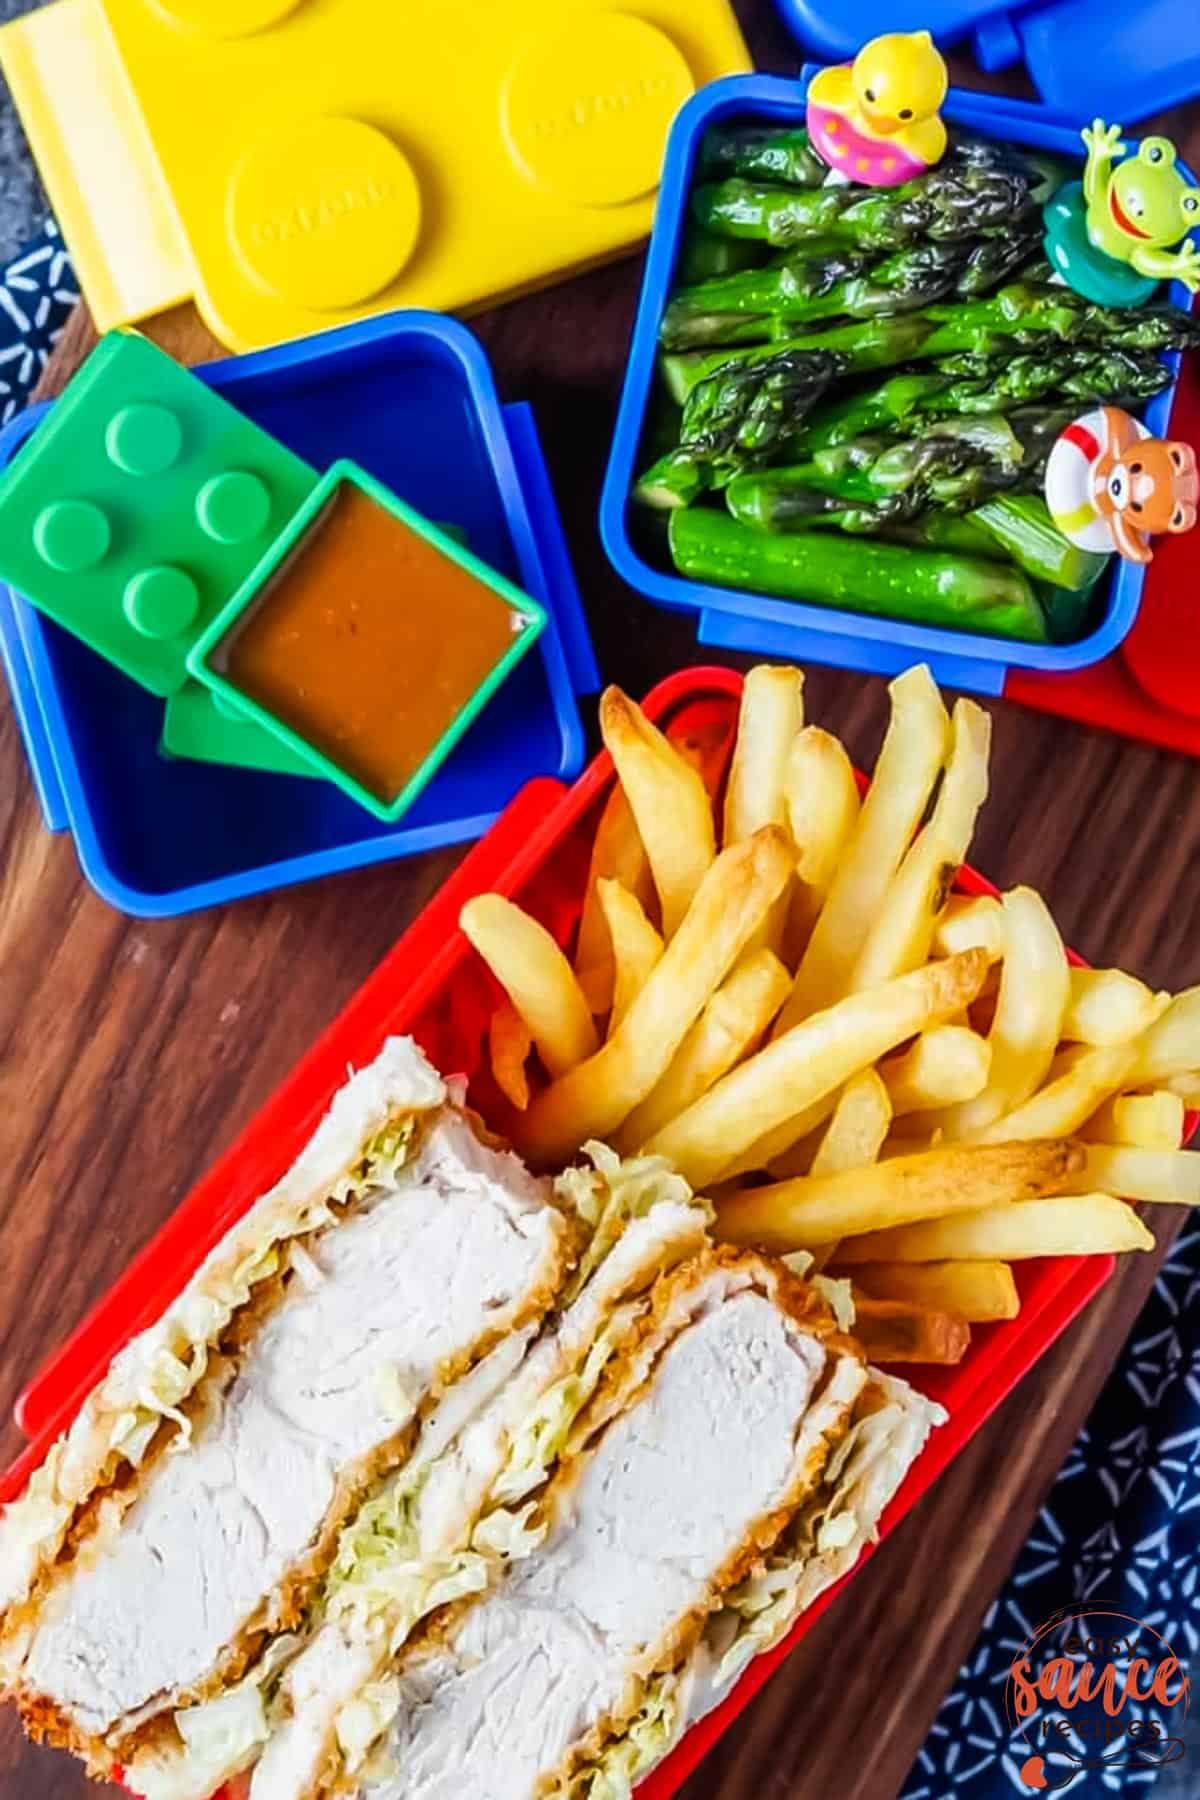 colorful building block food containers with asparagus, pork cutlet sandwiches, french fries and katsu sauce inside.